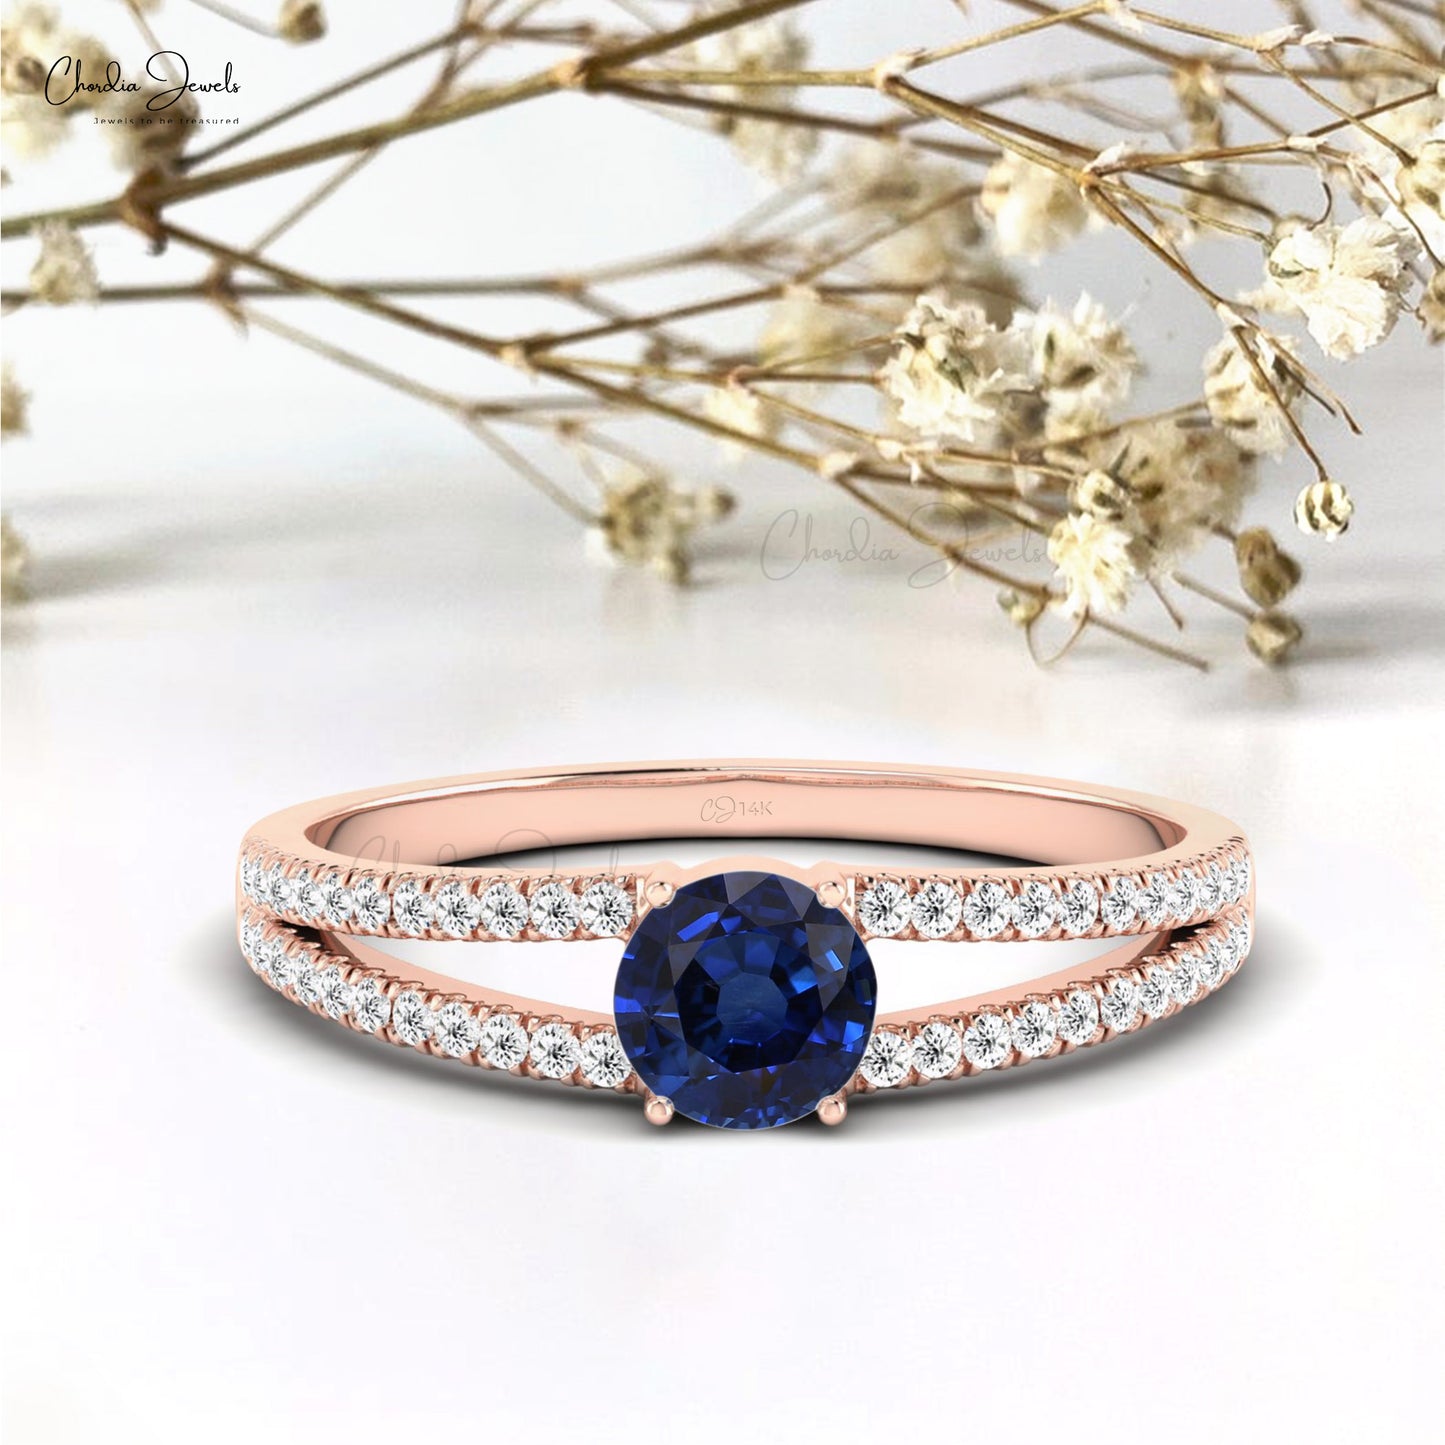 Signature Collection Genuine Blue Sapphire Ring in 18k Yellow Gold - 15605  15605 - Emerald Lady Jewelry